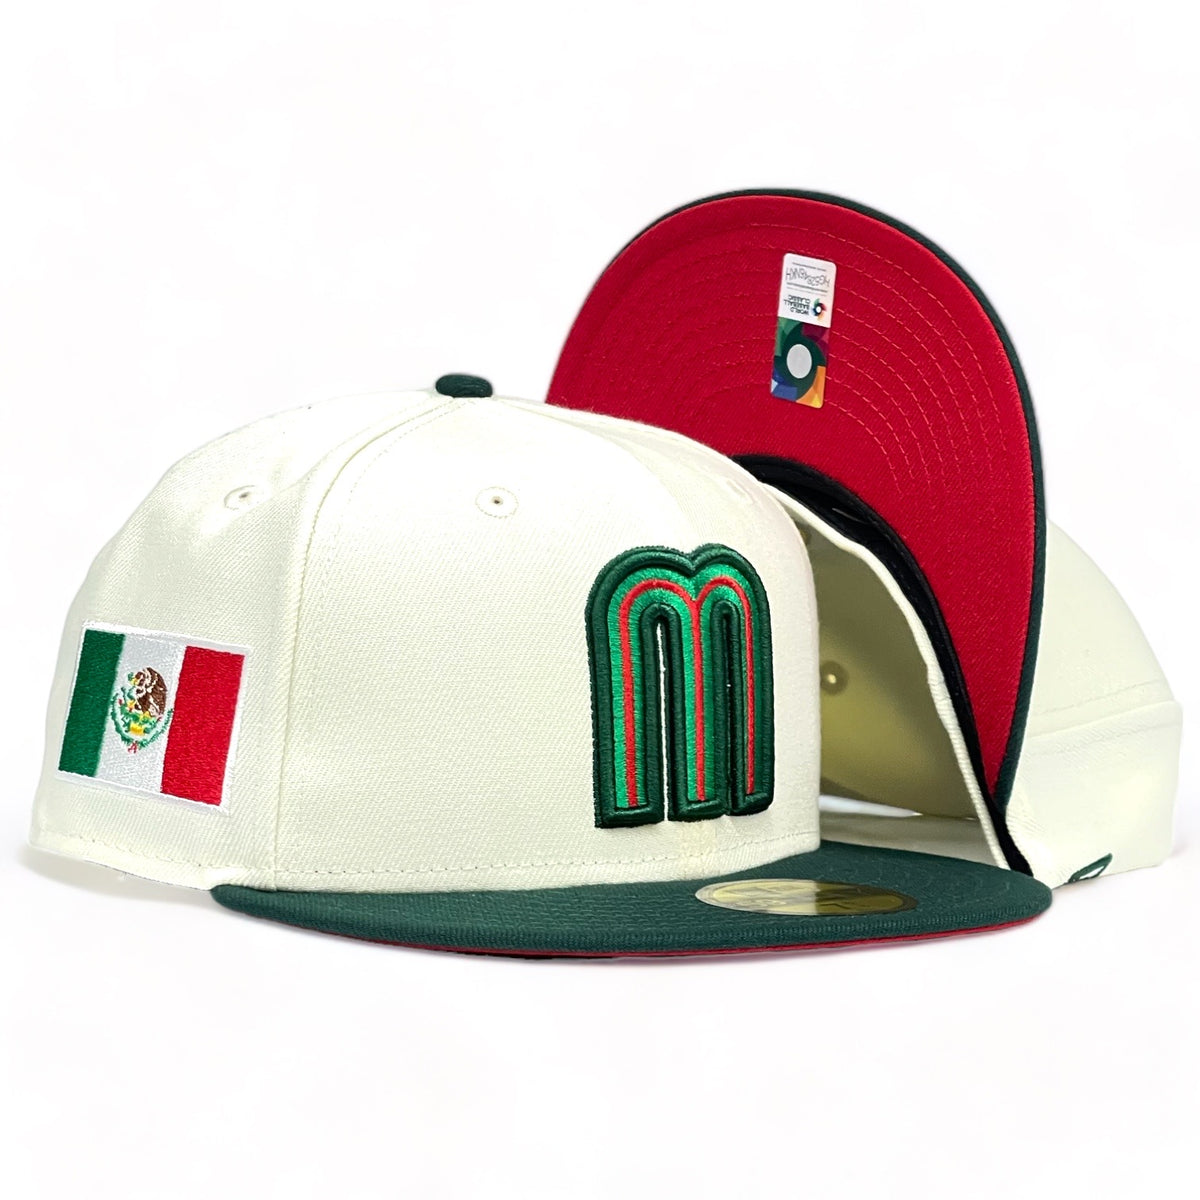 Mexico WBC New Era 59Fifty Fitted Hat Chrome White / Dark Green